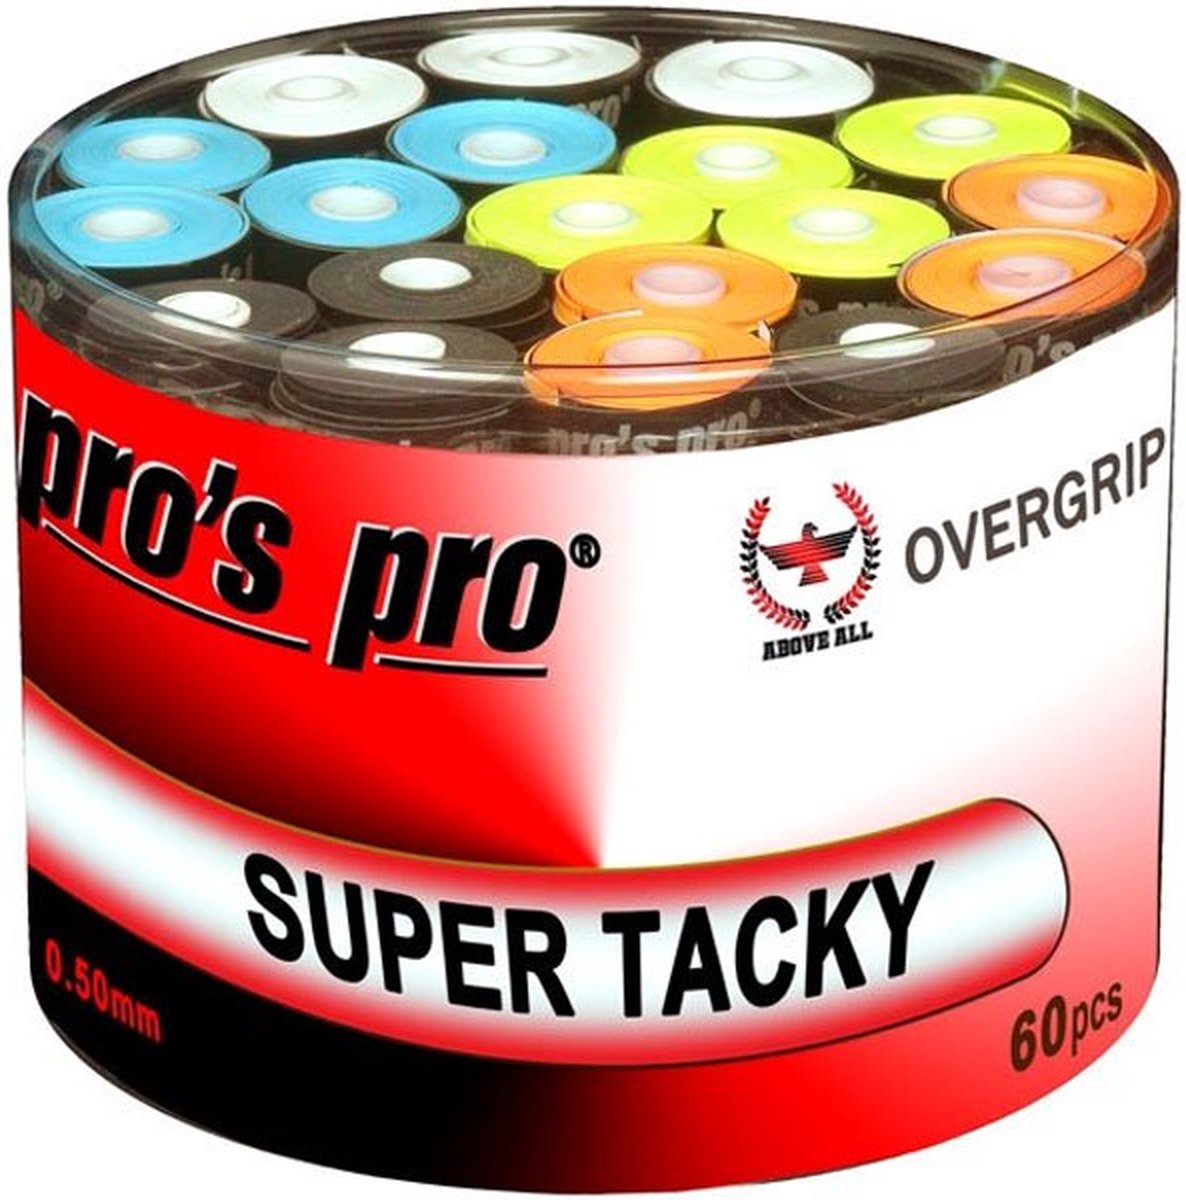 Pro's Pro Super Tacky 60 overgrips multicolor - Approach-Sports